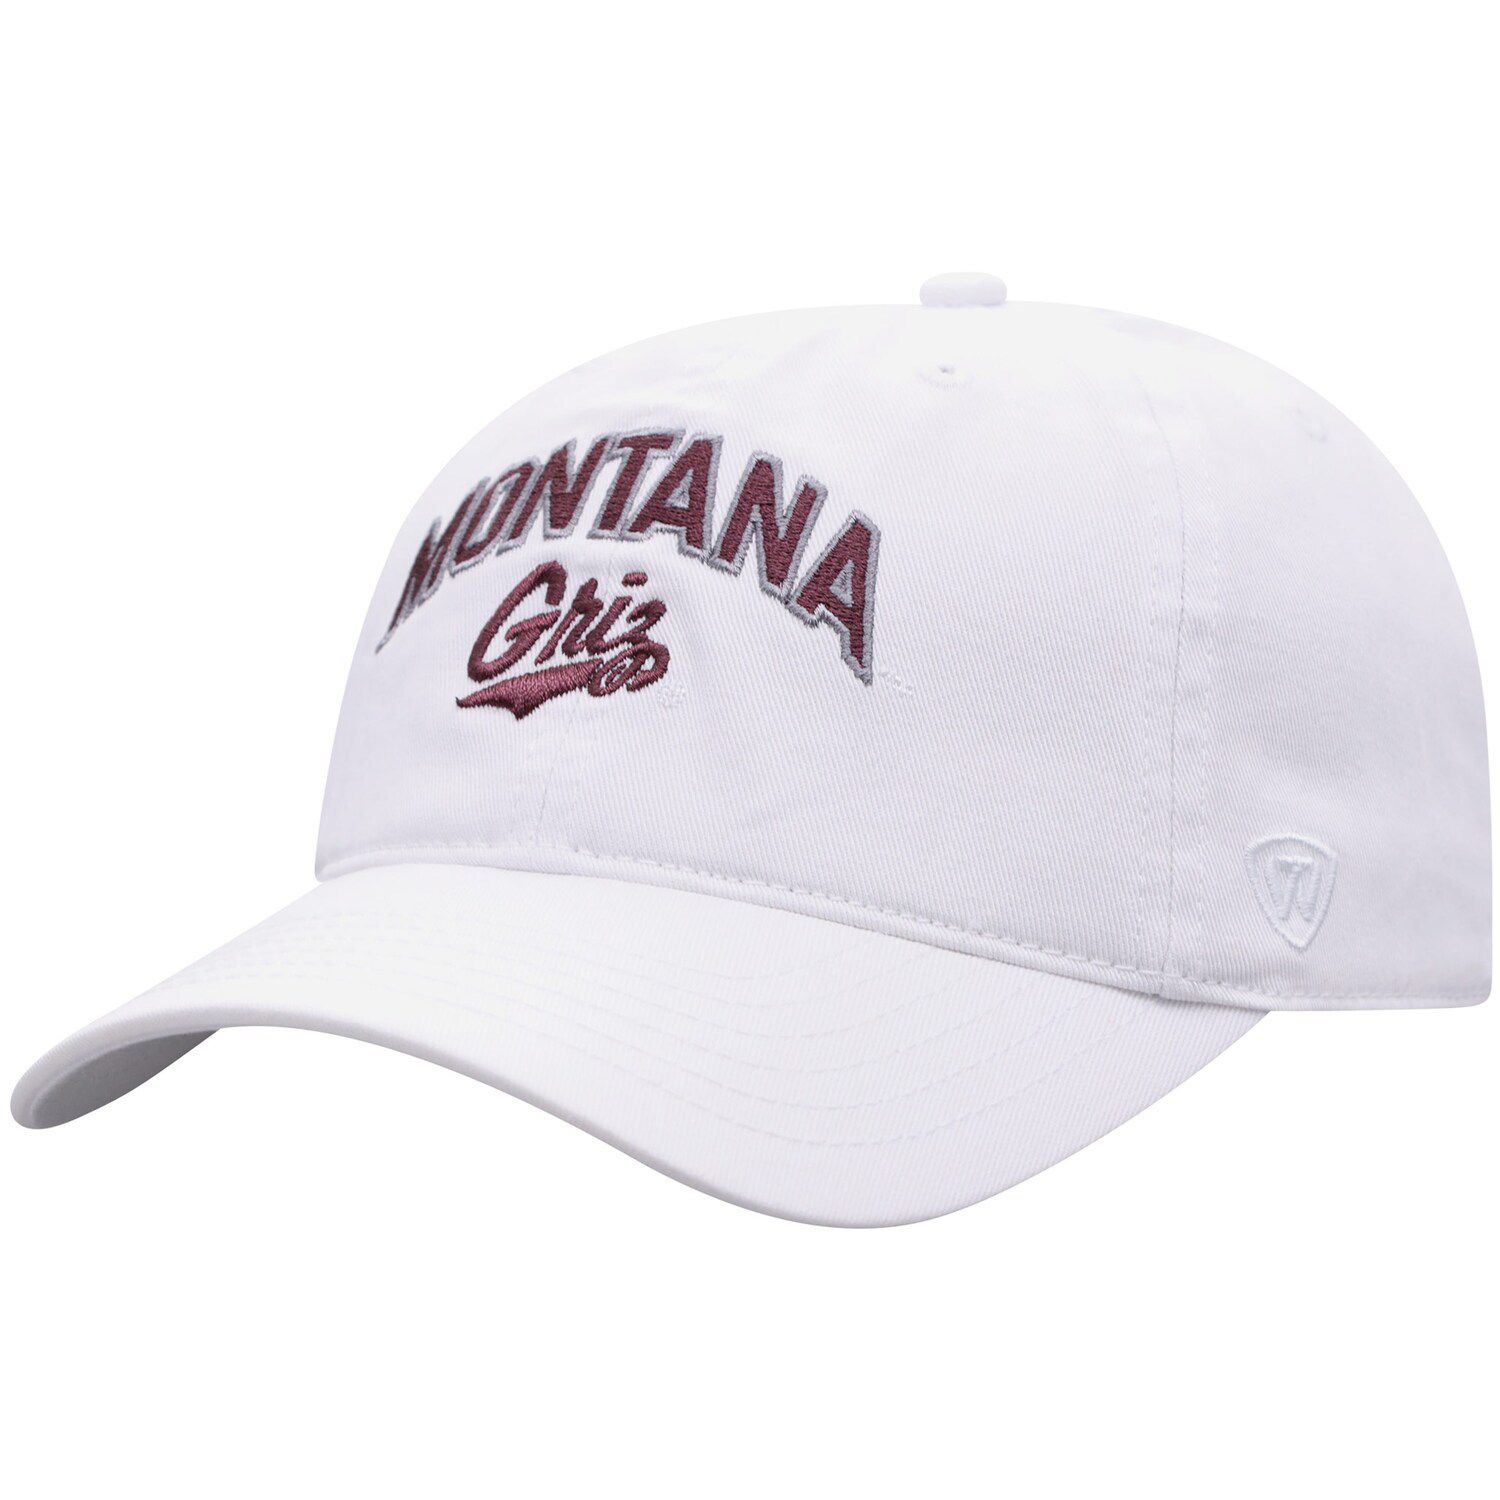 Image for Unbranded Men's Top of the World White Montana Grizzlies Classic Arch Adjustable Hat at Kohl's.